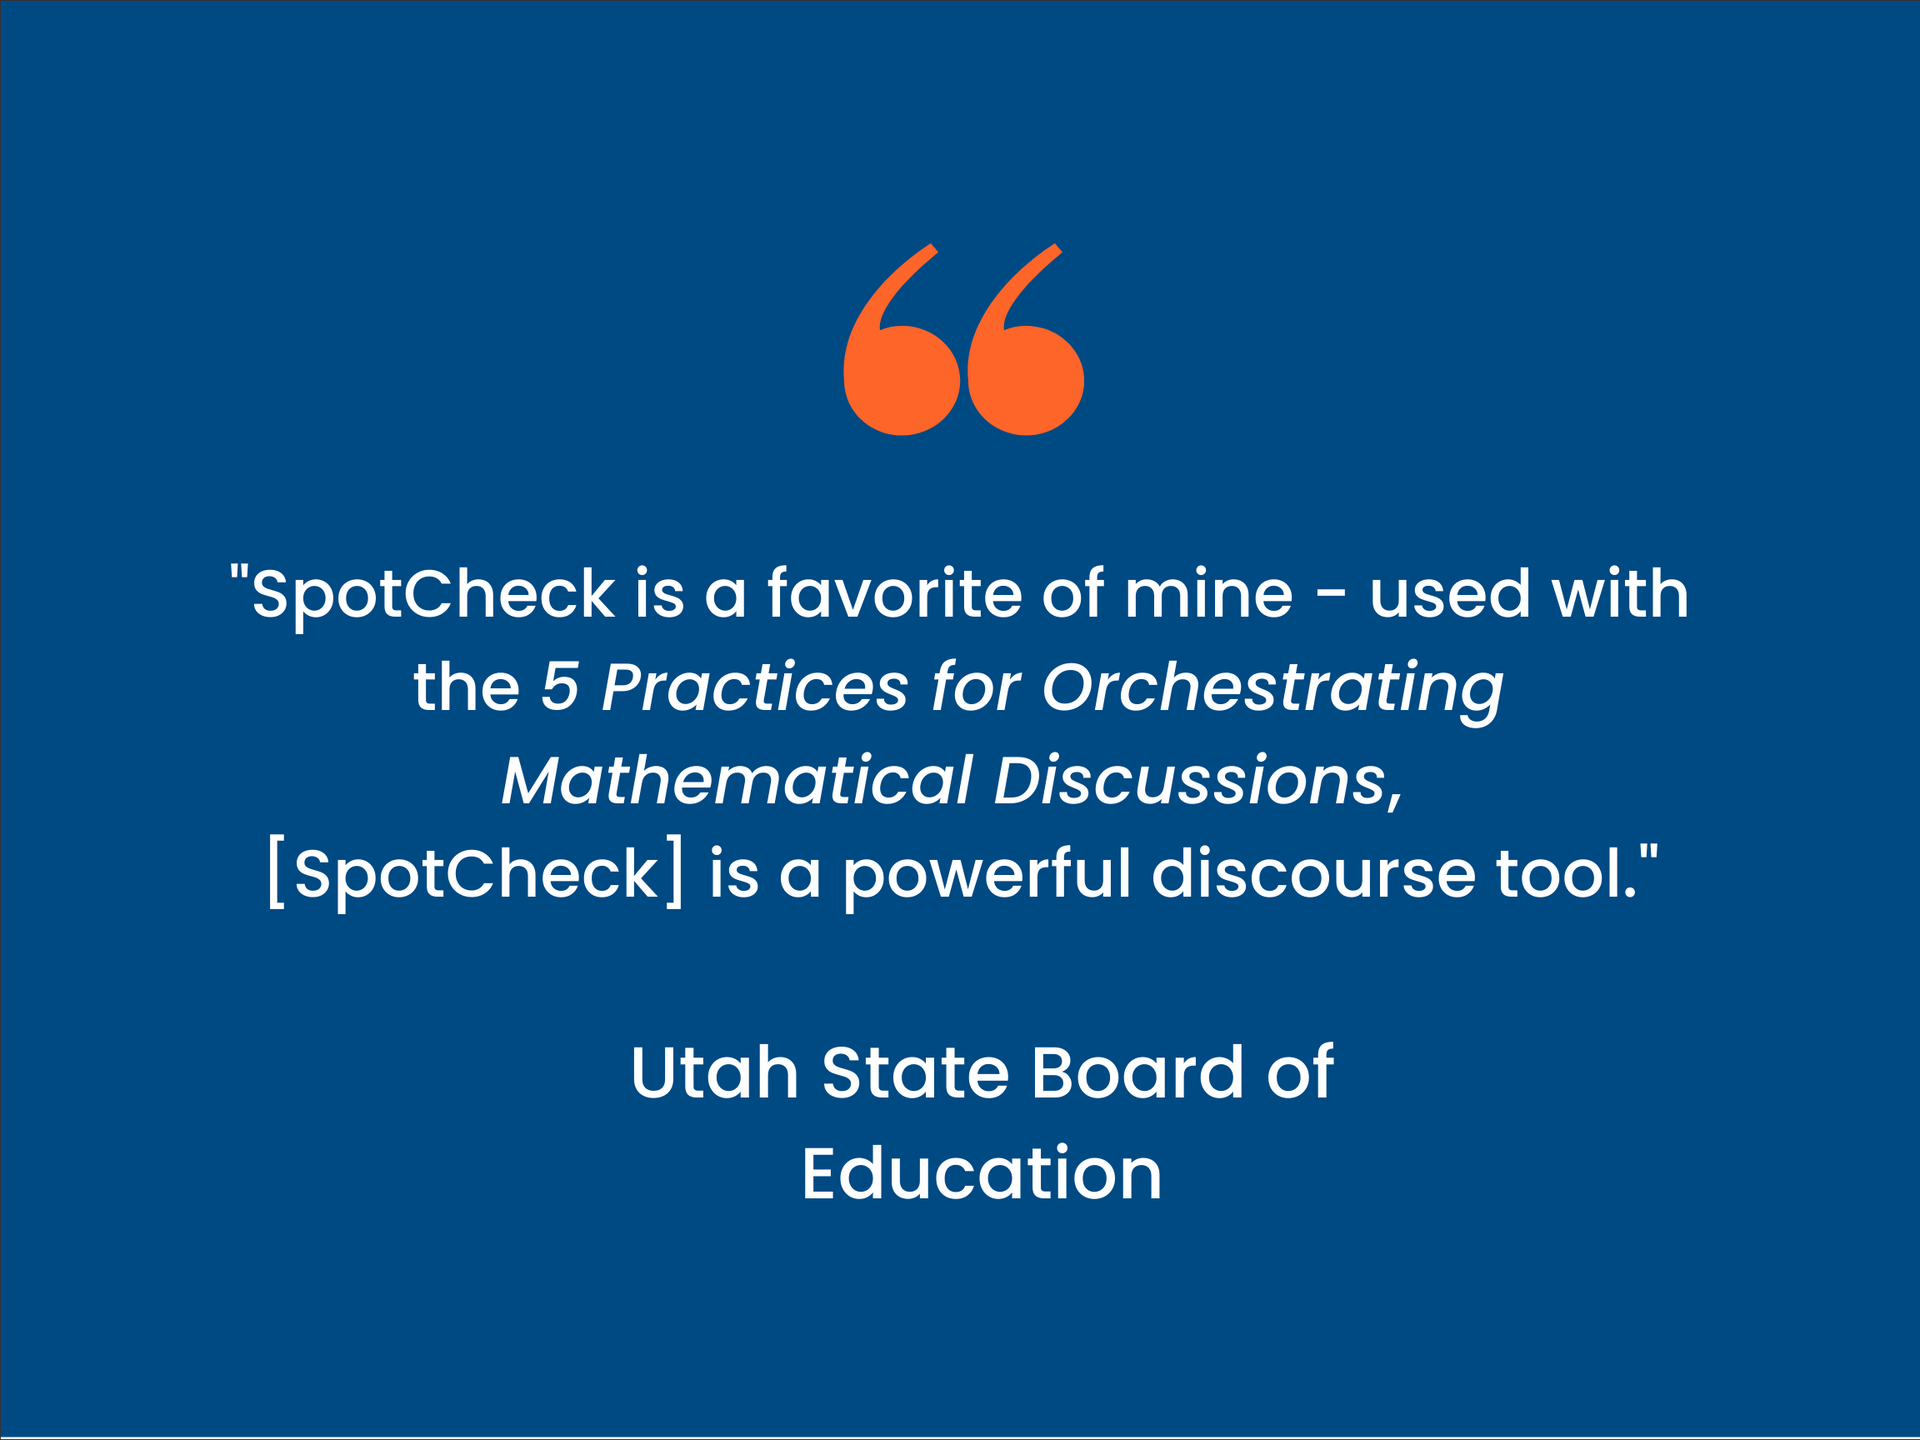 Quote card - Utah State Board of Education says "SpotCheck is a favorite of mine - used with the 5 Practices of Orchestrating Mathematical Discussions, SpotCheck is a powerful discourse tool."